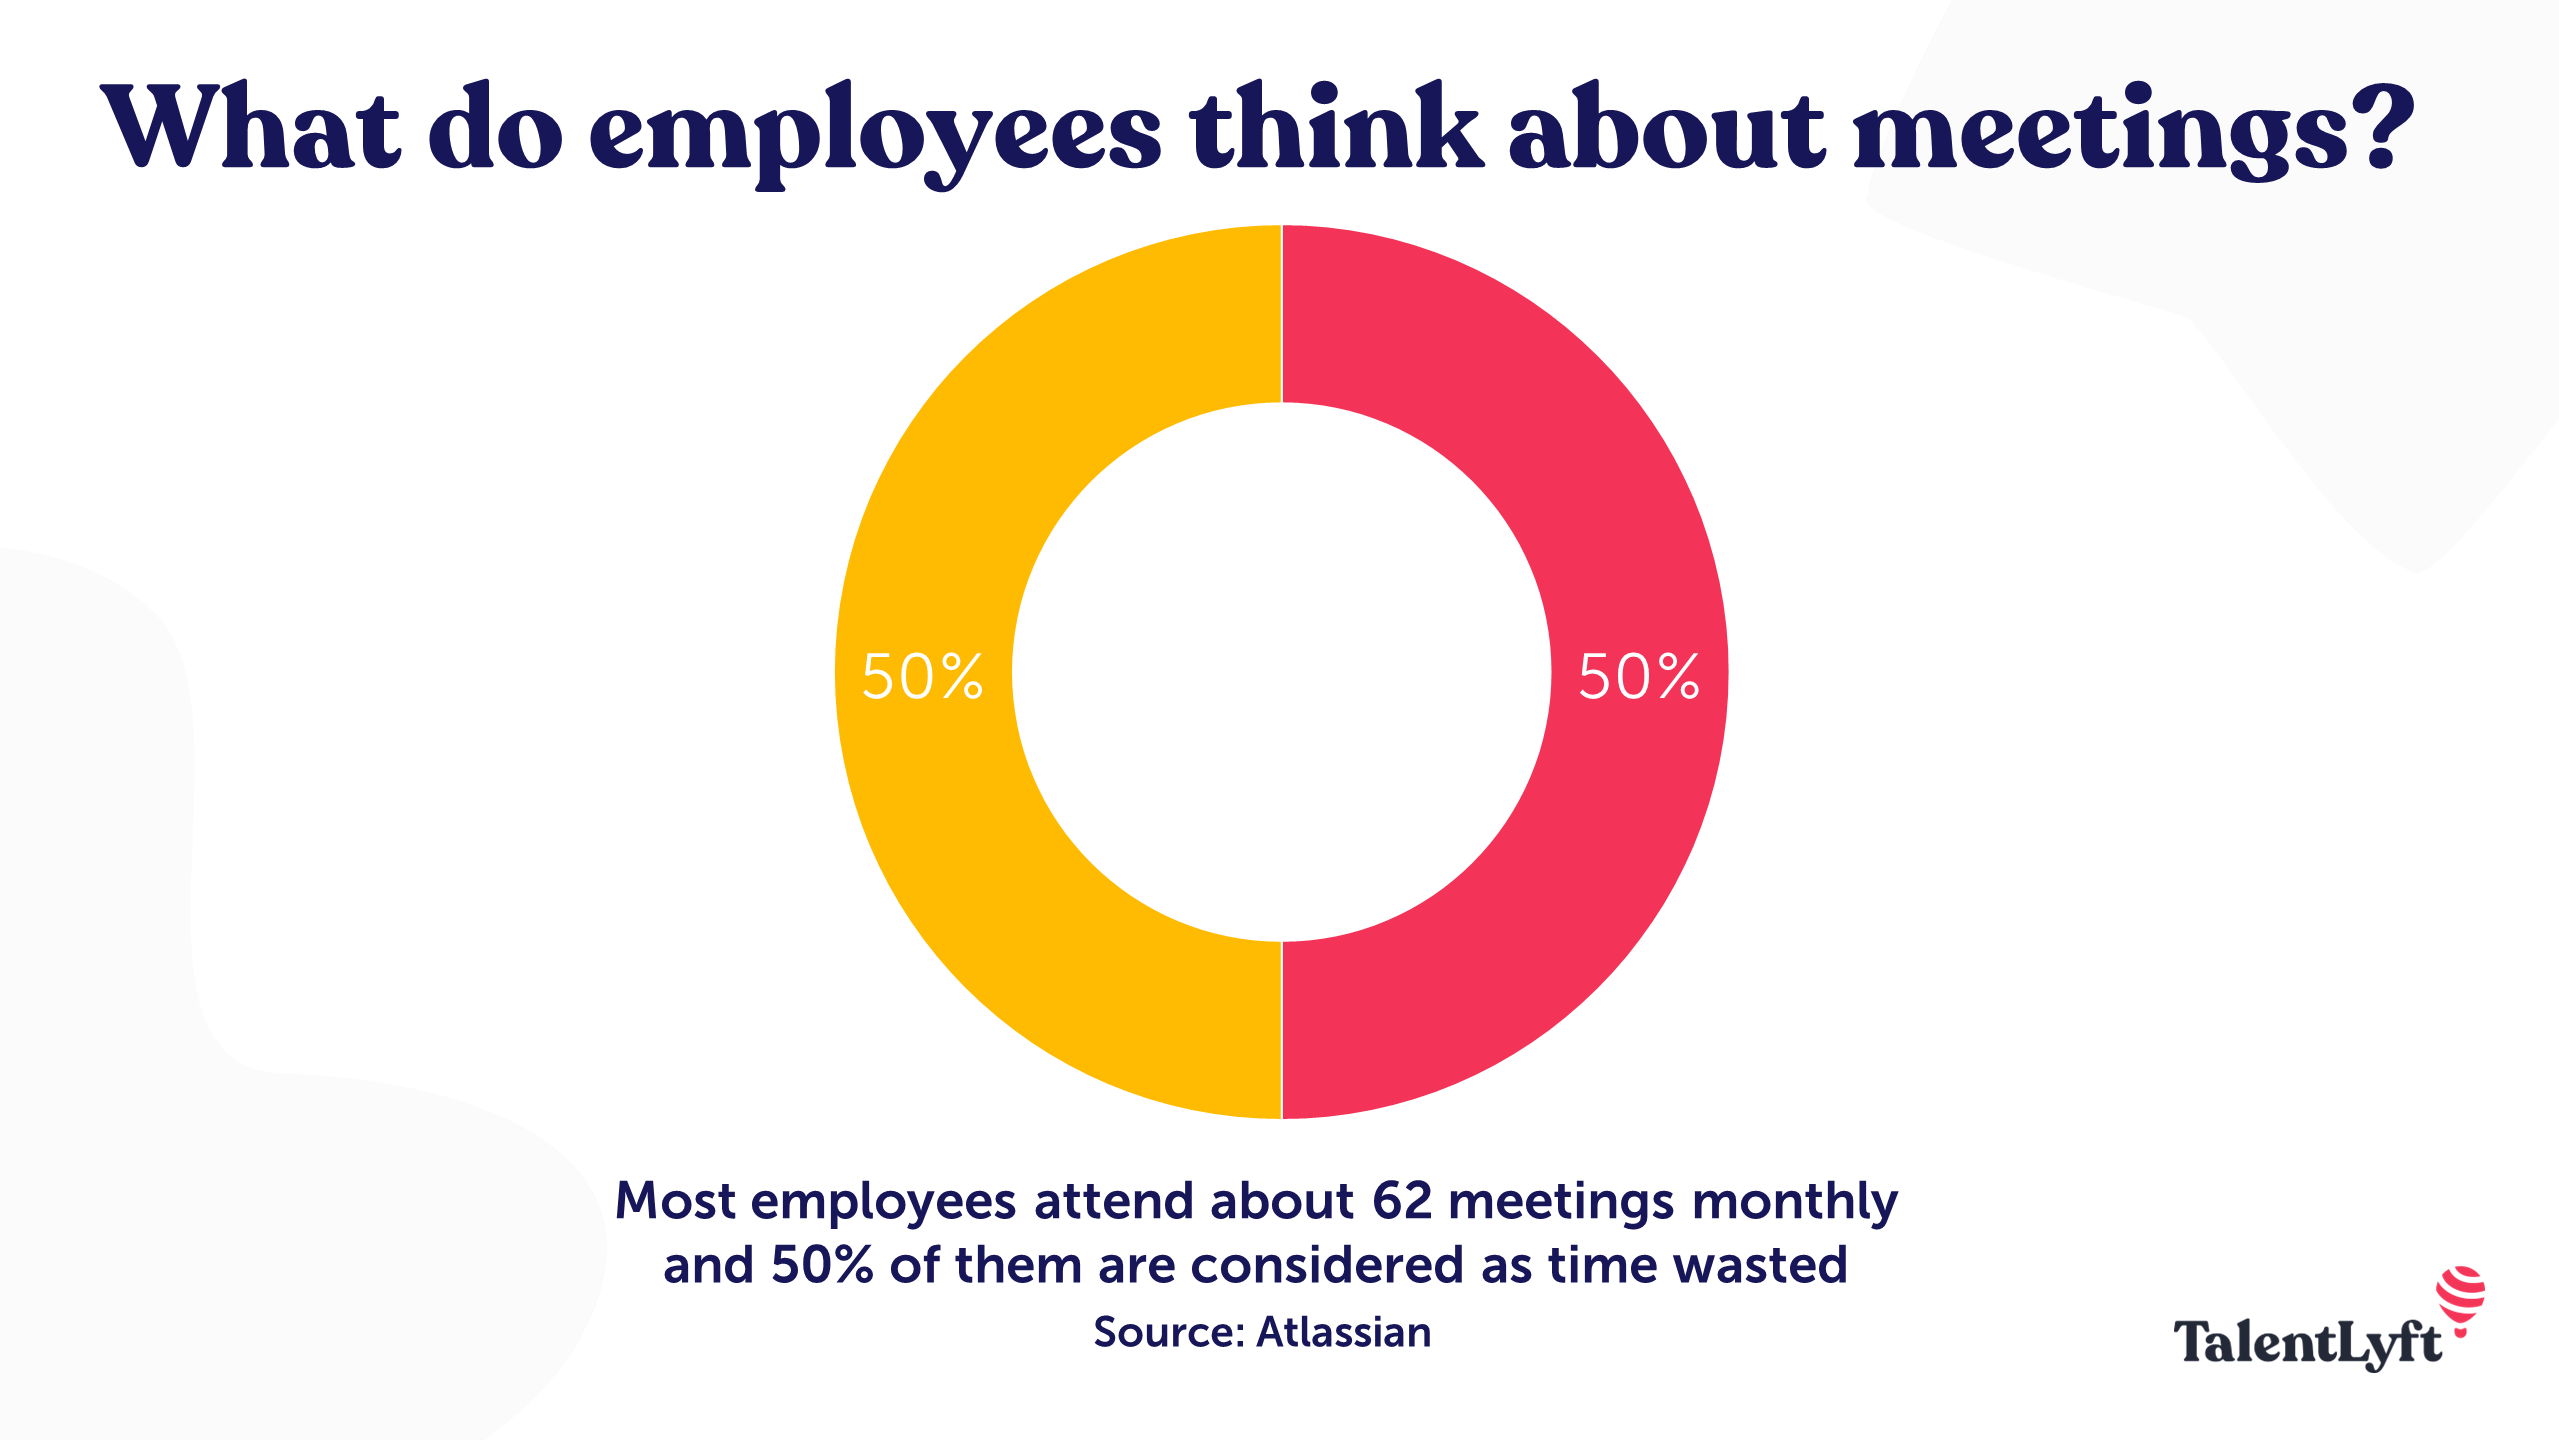 Employees believe 50% of meetings are time-wasters